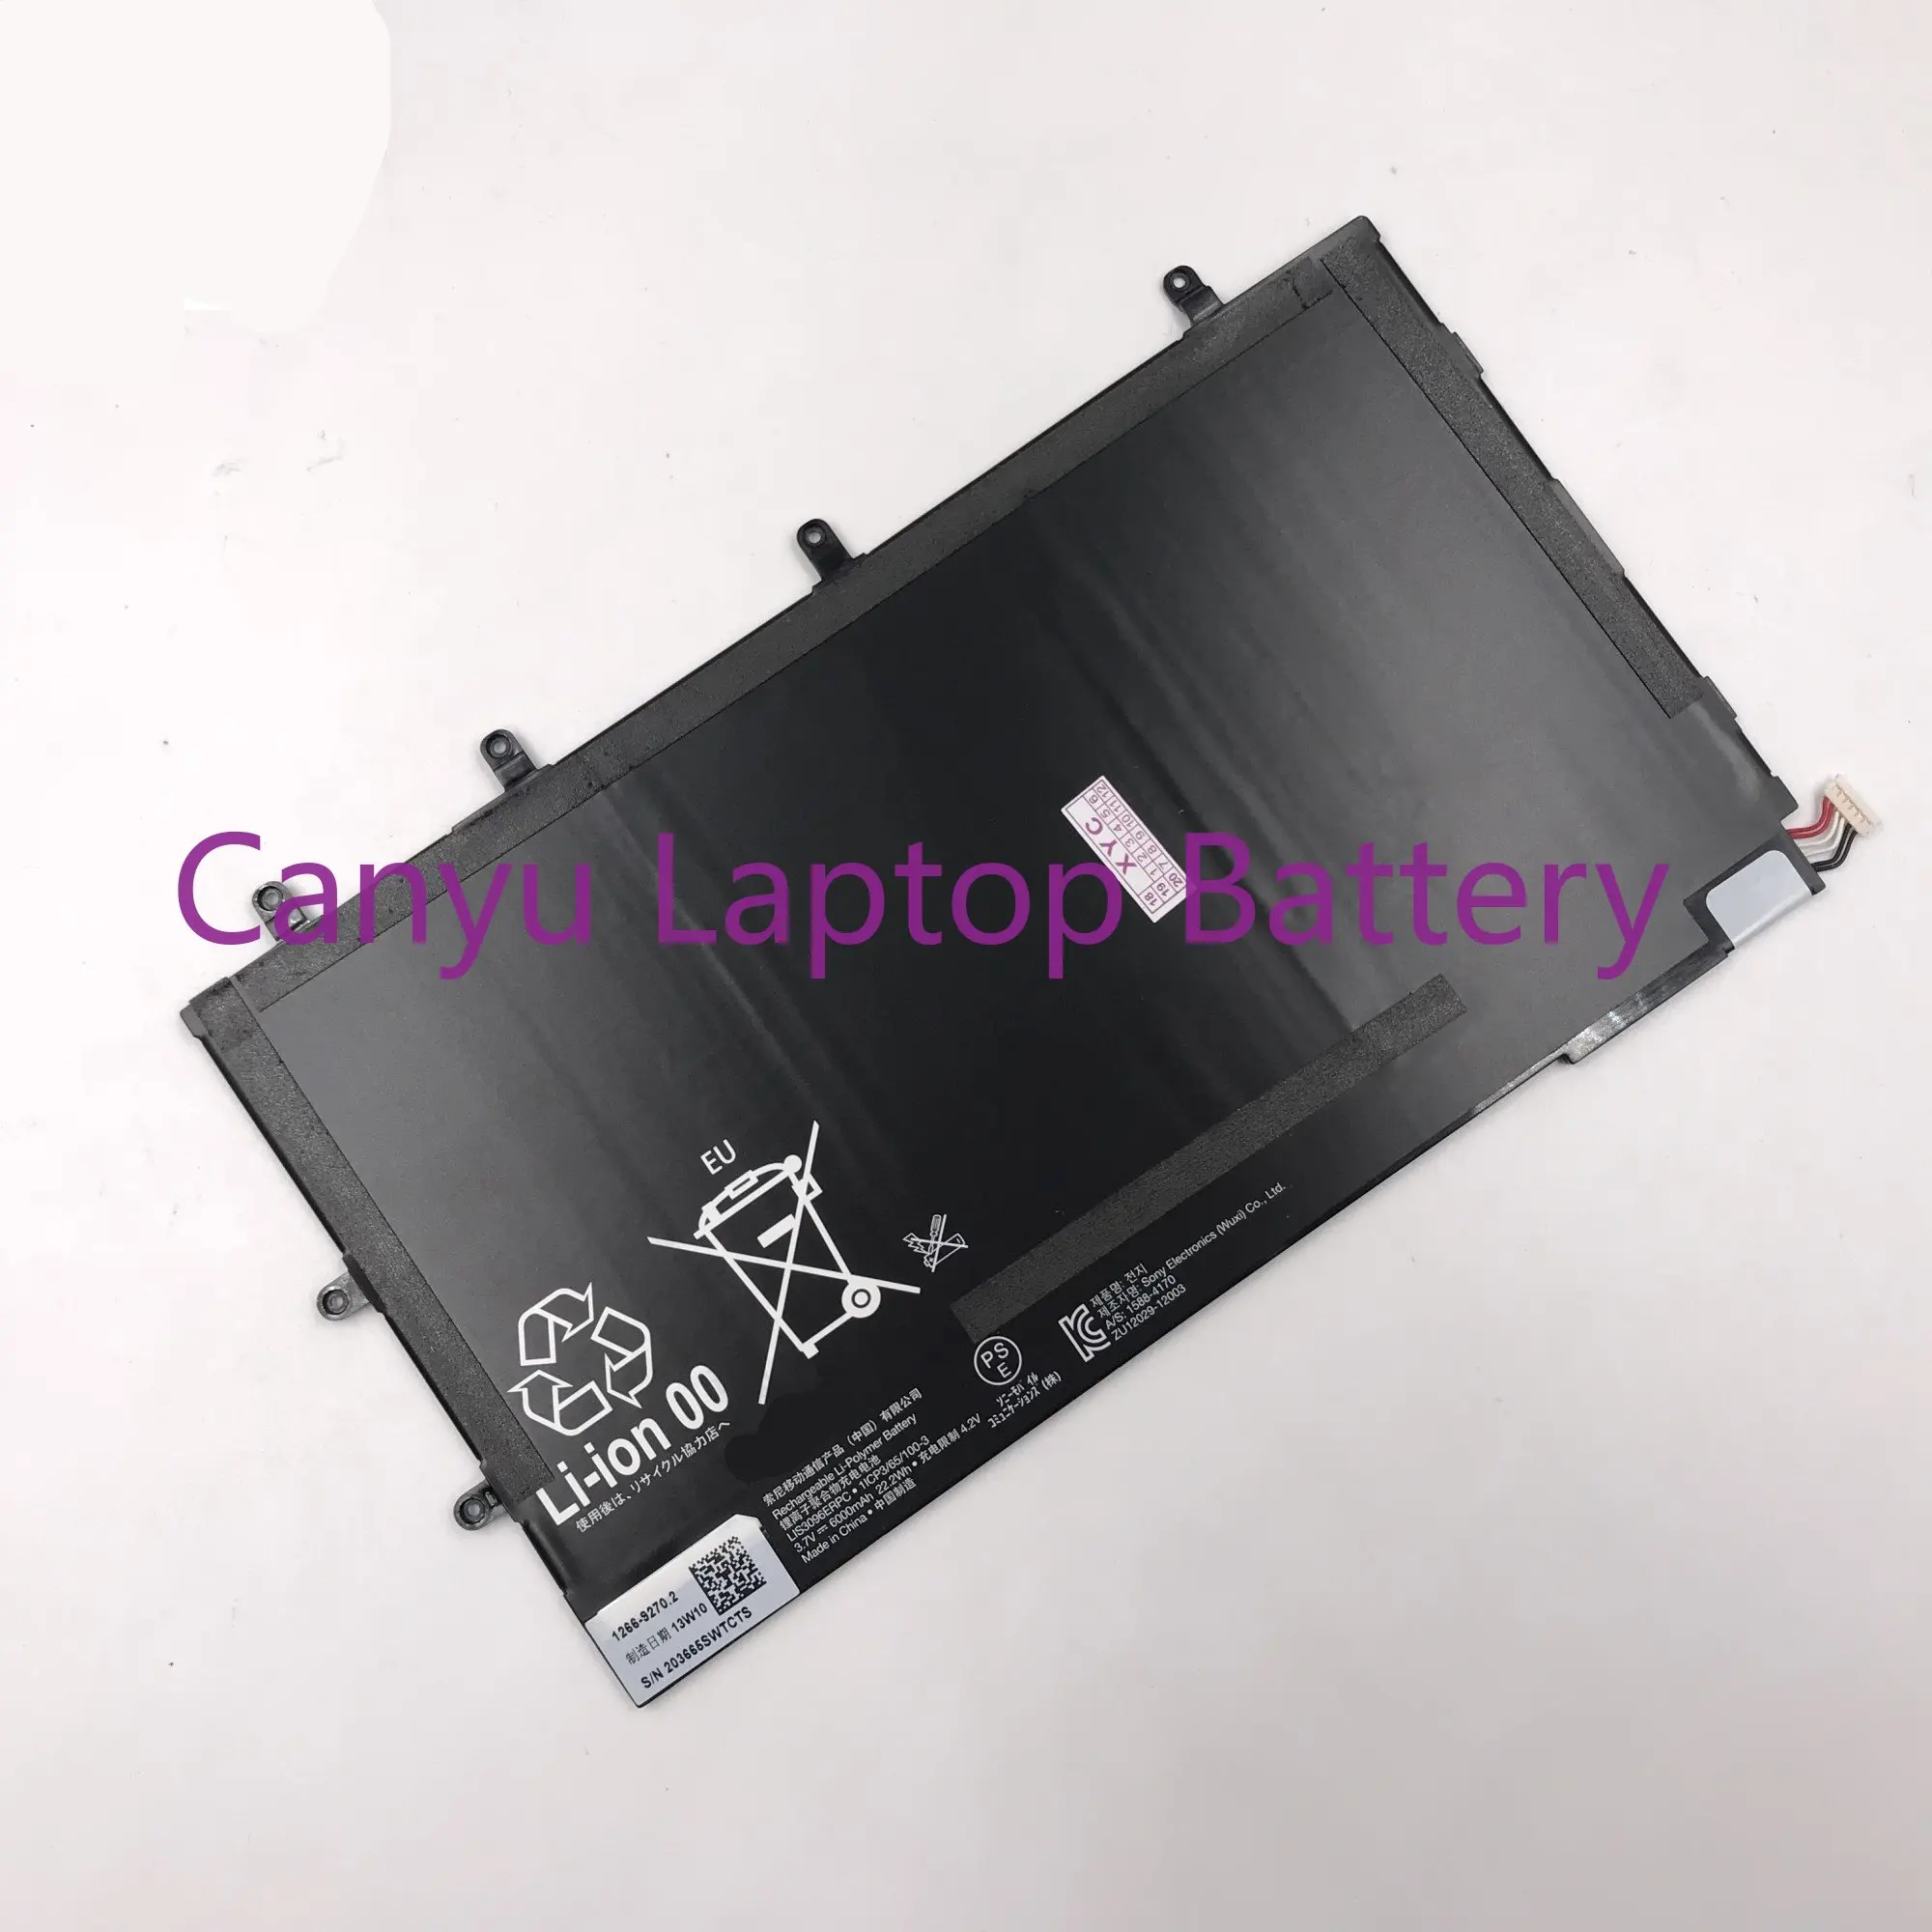 

new Replacement Battery For SONY Xperia Tablet Z Tablet 1ICP3/65/100-3 LIS3096ERPC Genuine Tablet Battery 6000mAh